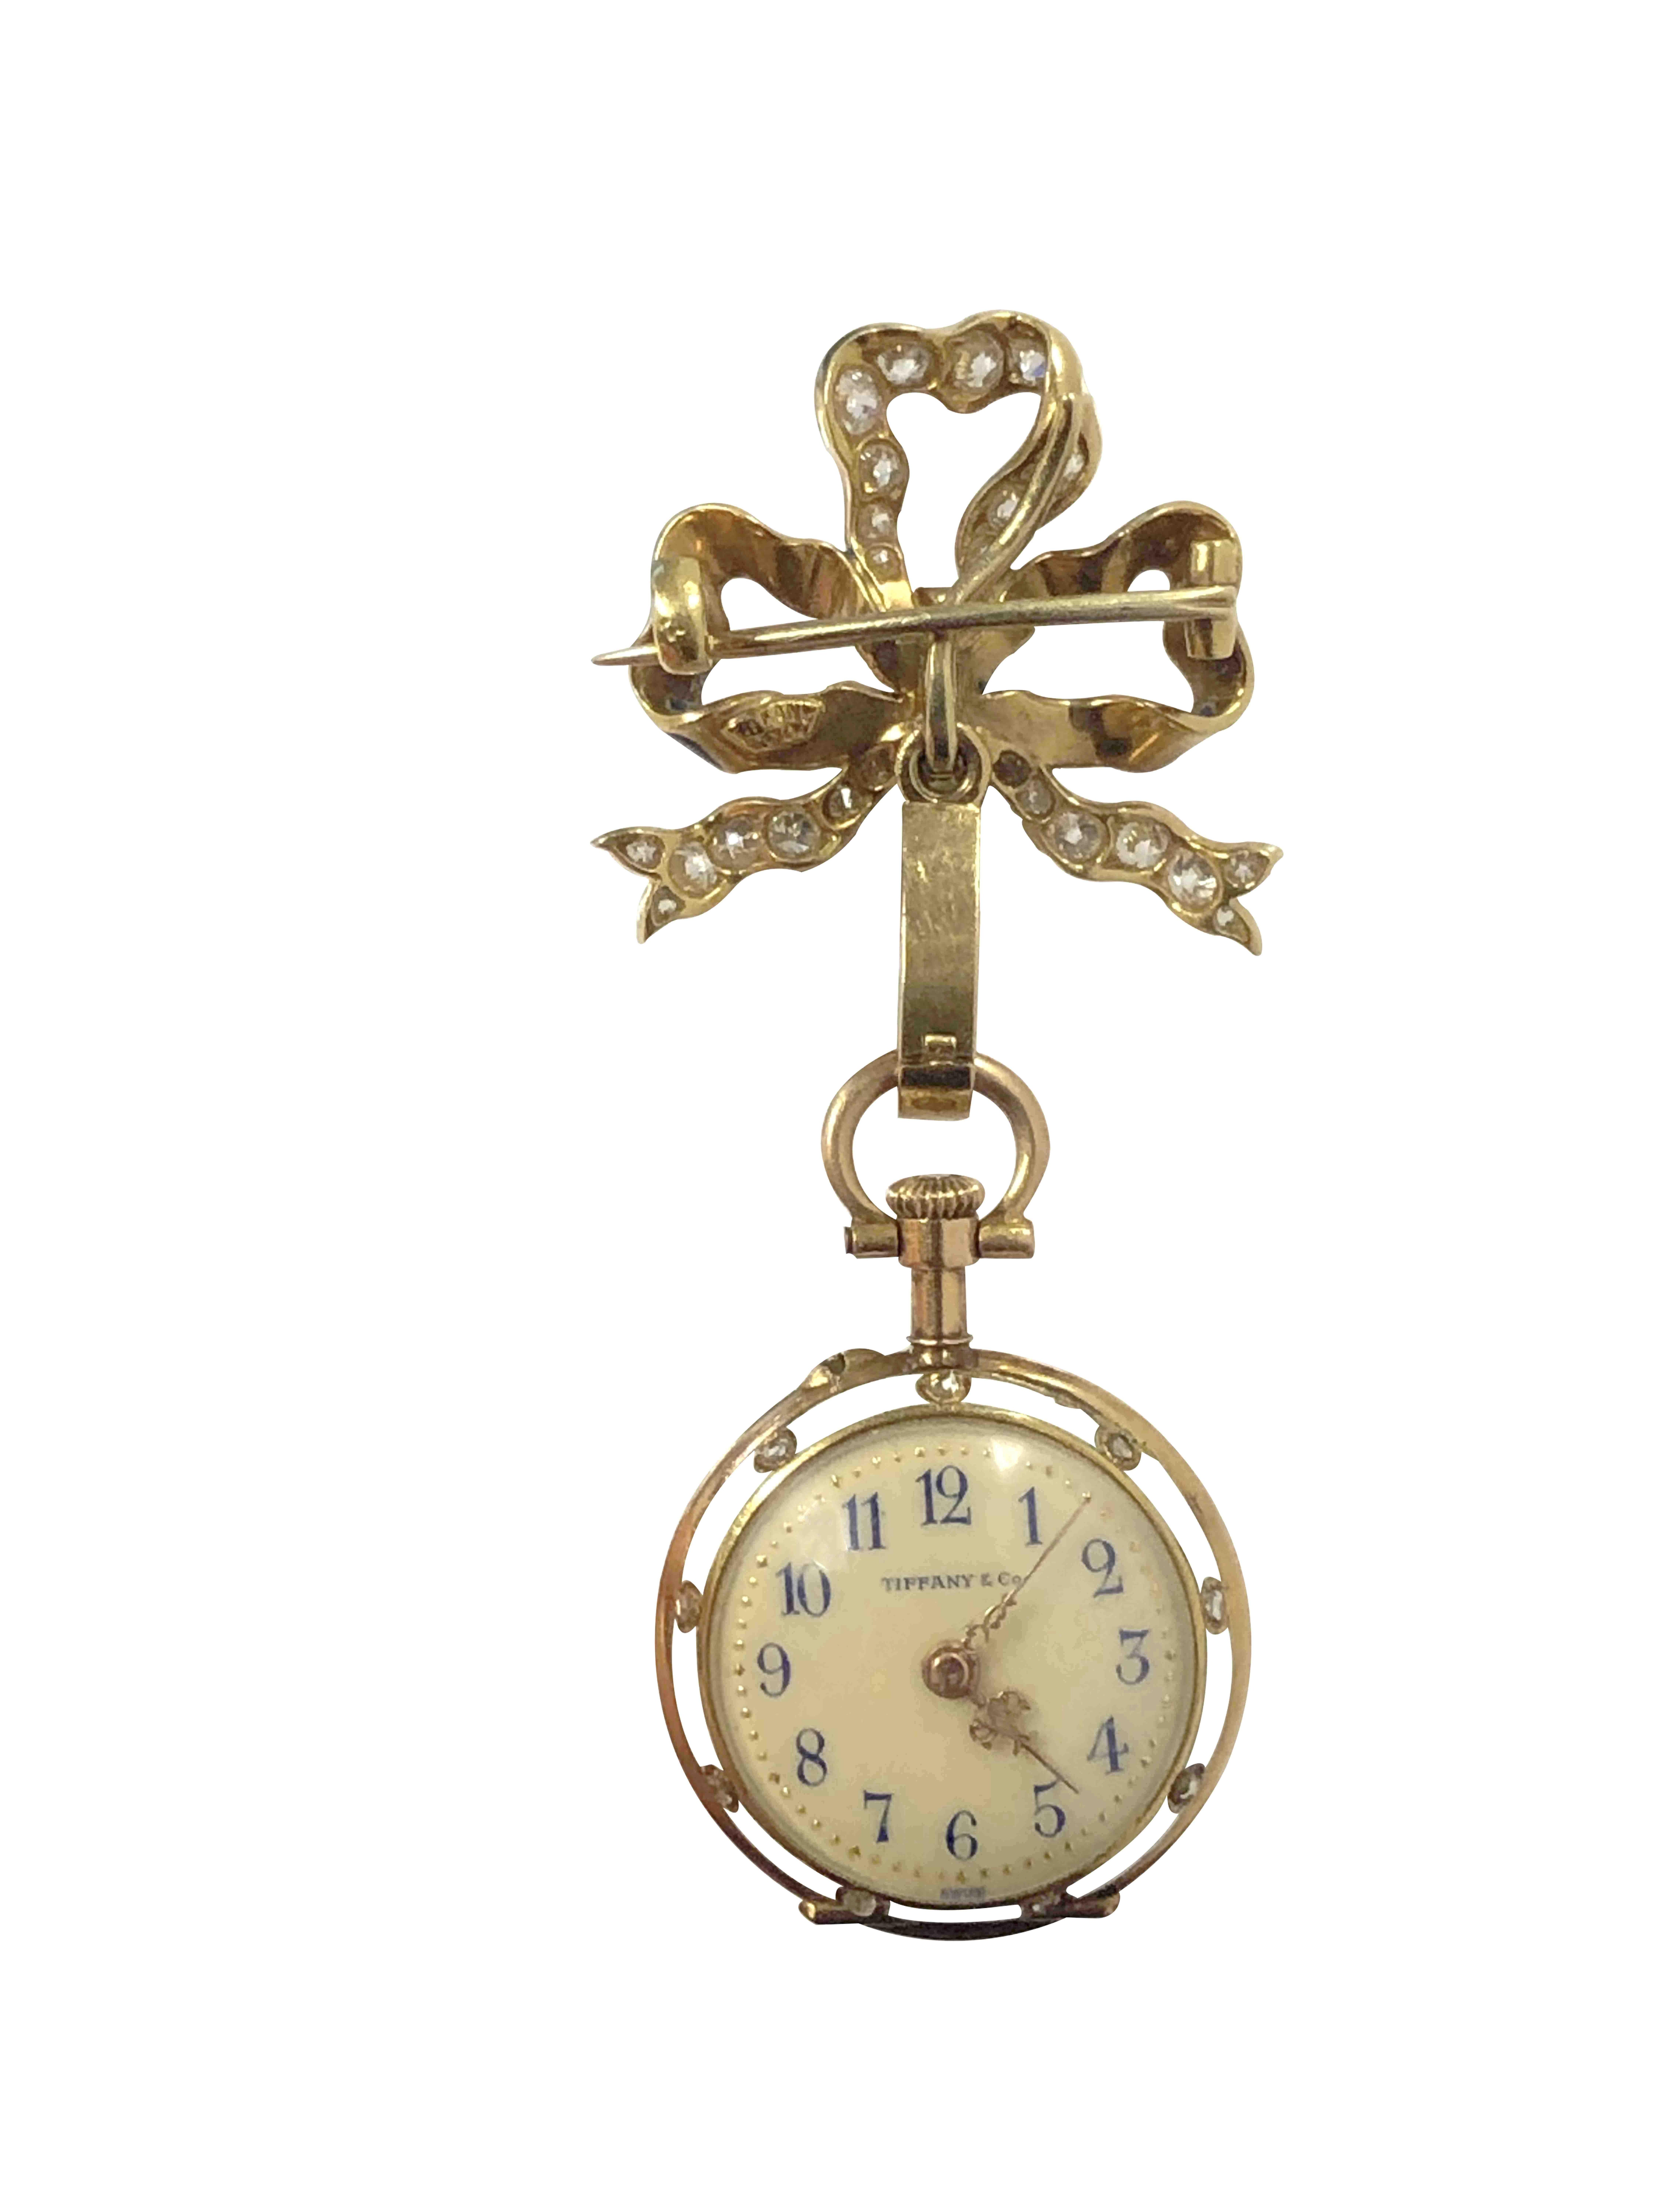 Circa 1910 Tiffany & Company Lapel Watch, the 18K Yellow Gold watch measures 22 M.M. ( 7/8 inch ) in diameter, with Cobalt Blue and White Enamel and is set with Old Mine and Rose cut Diamonds. A Gold inside dust cover over a manual wind cylinder